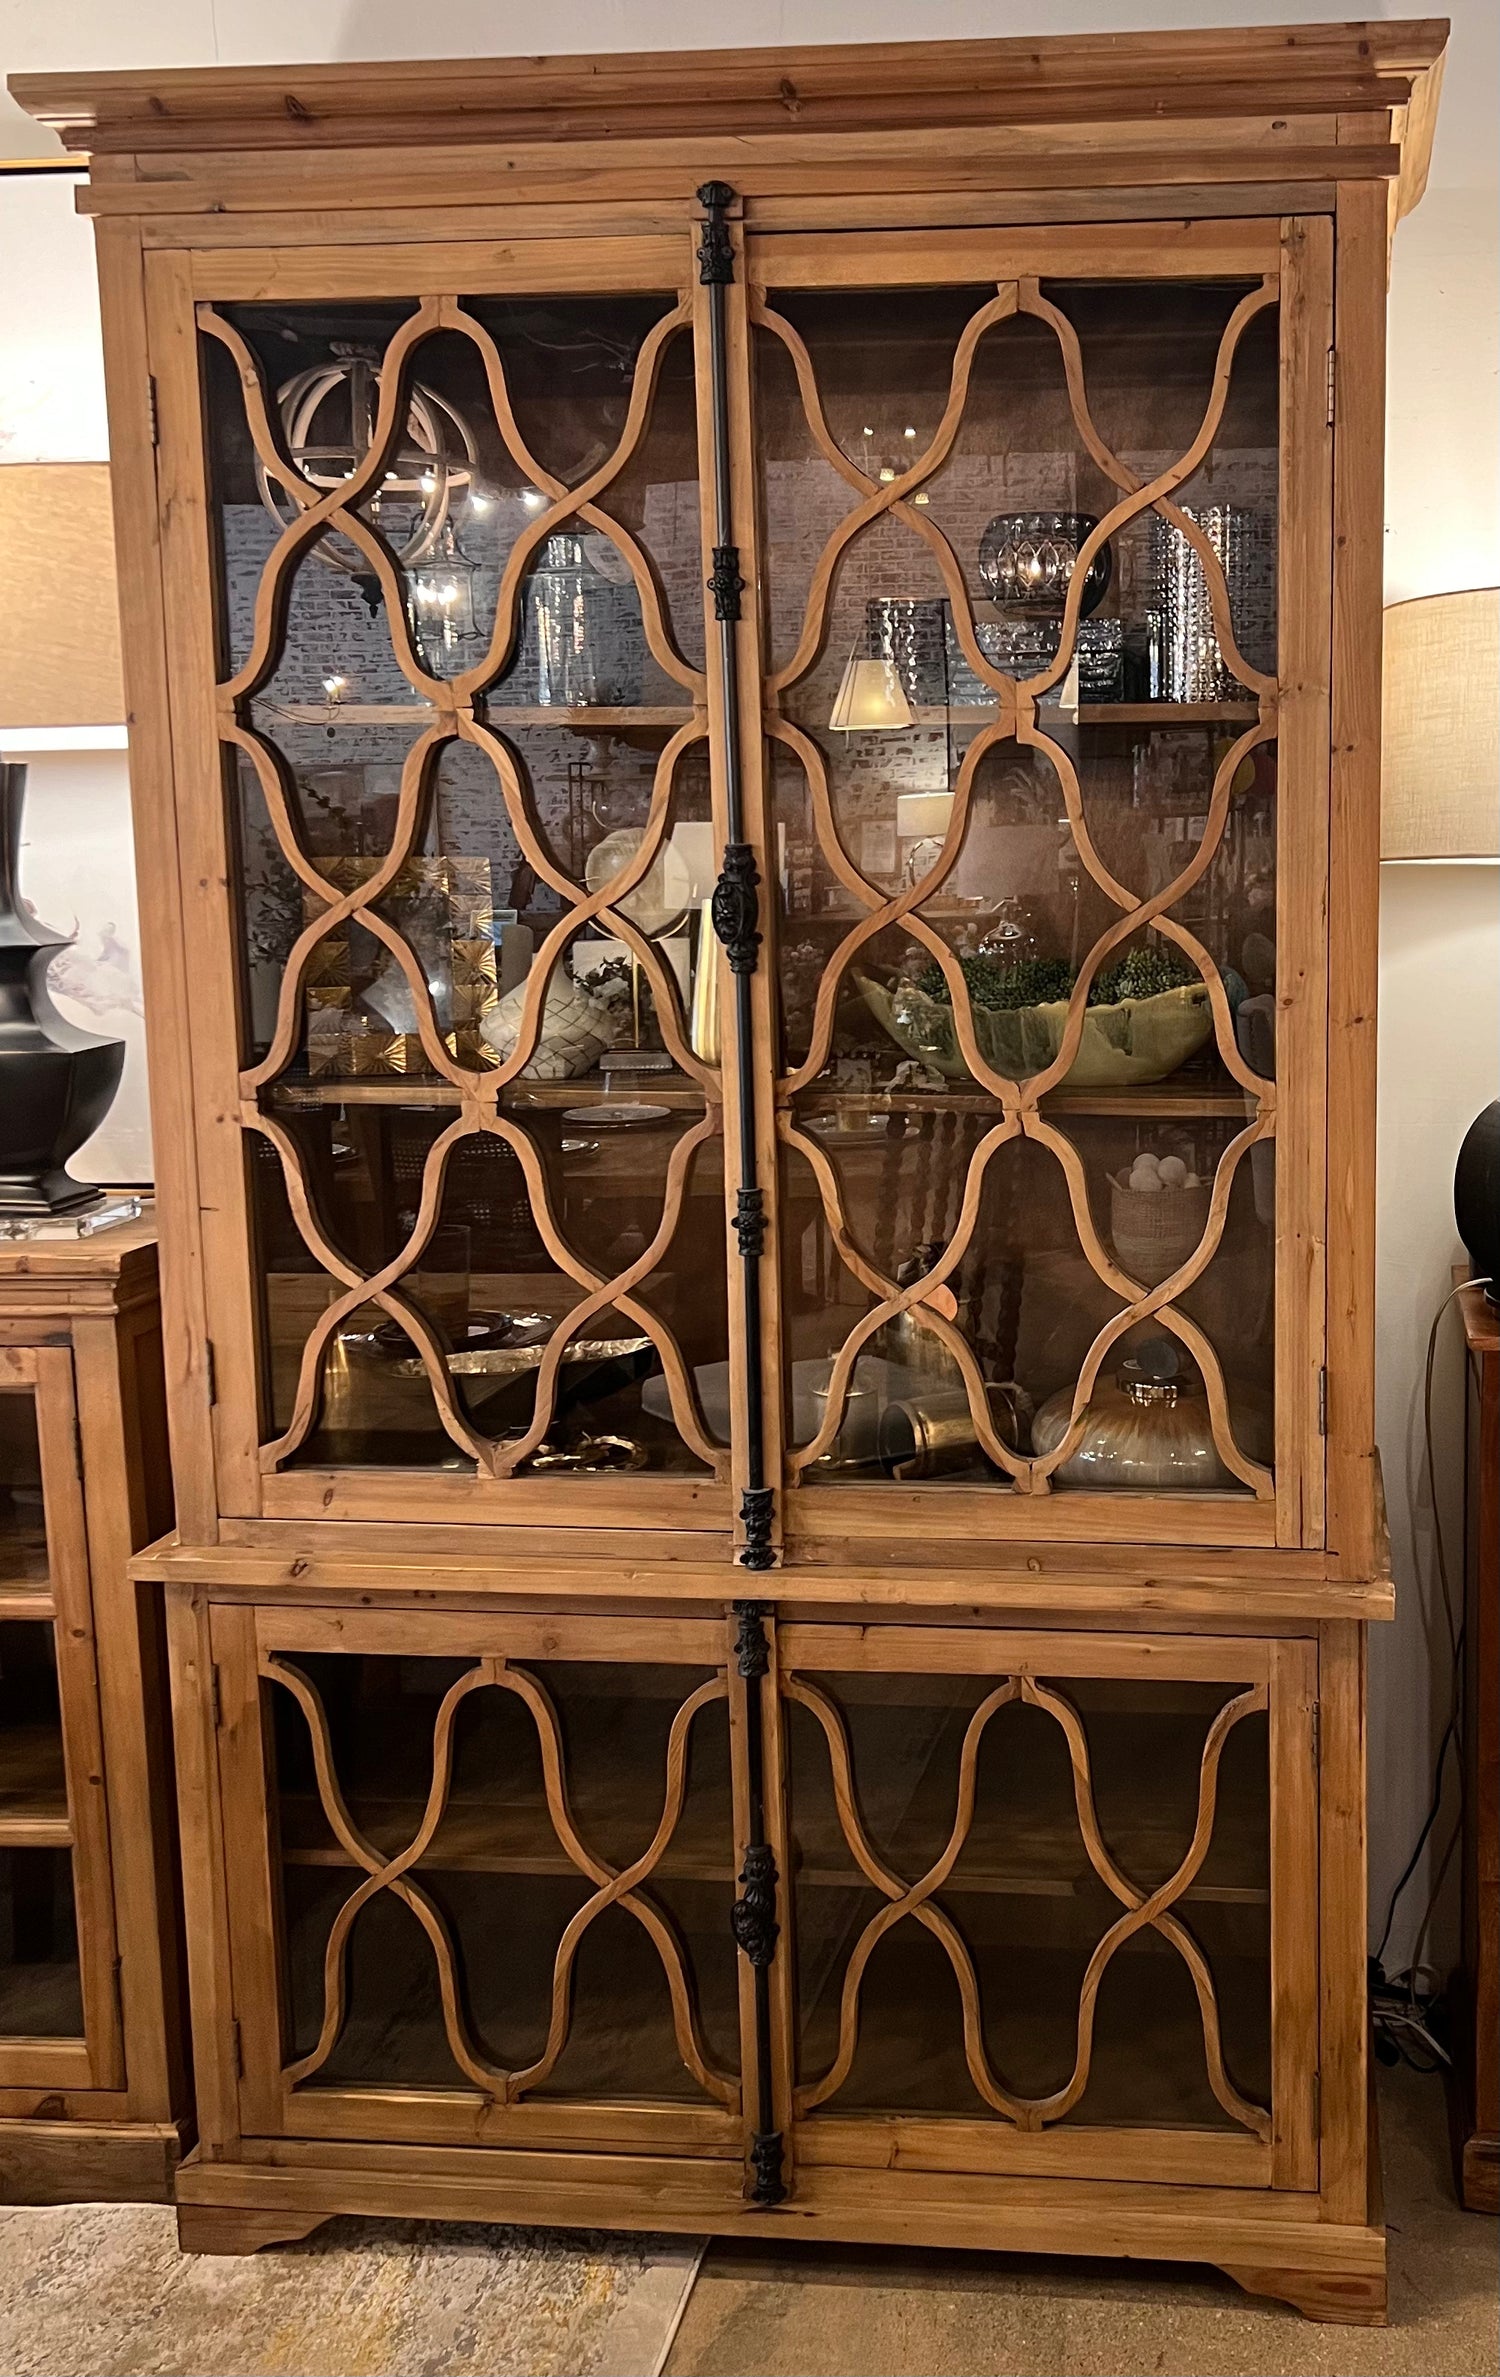 Display Cabinets, Bookcases, & Bookshelves